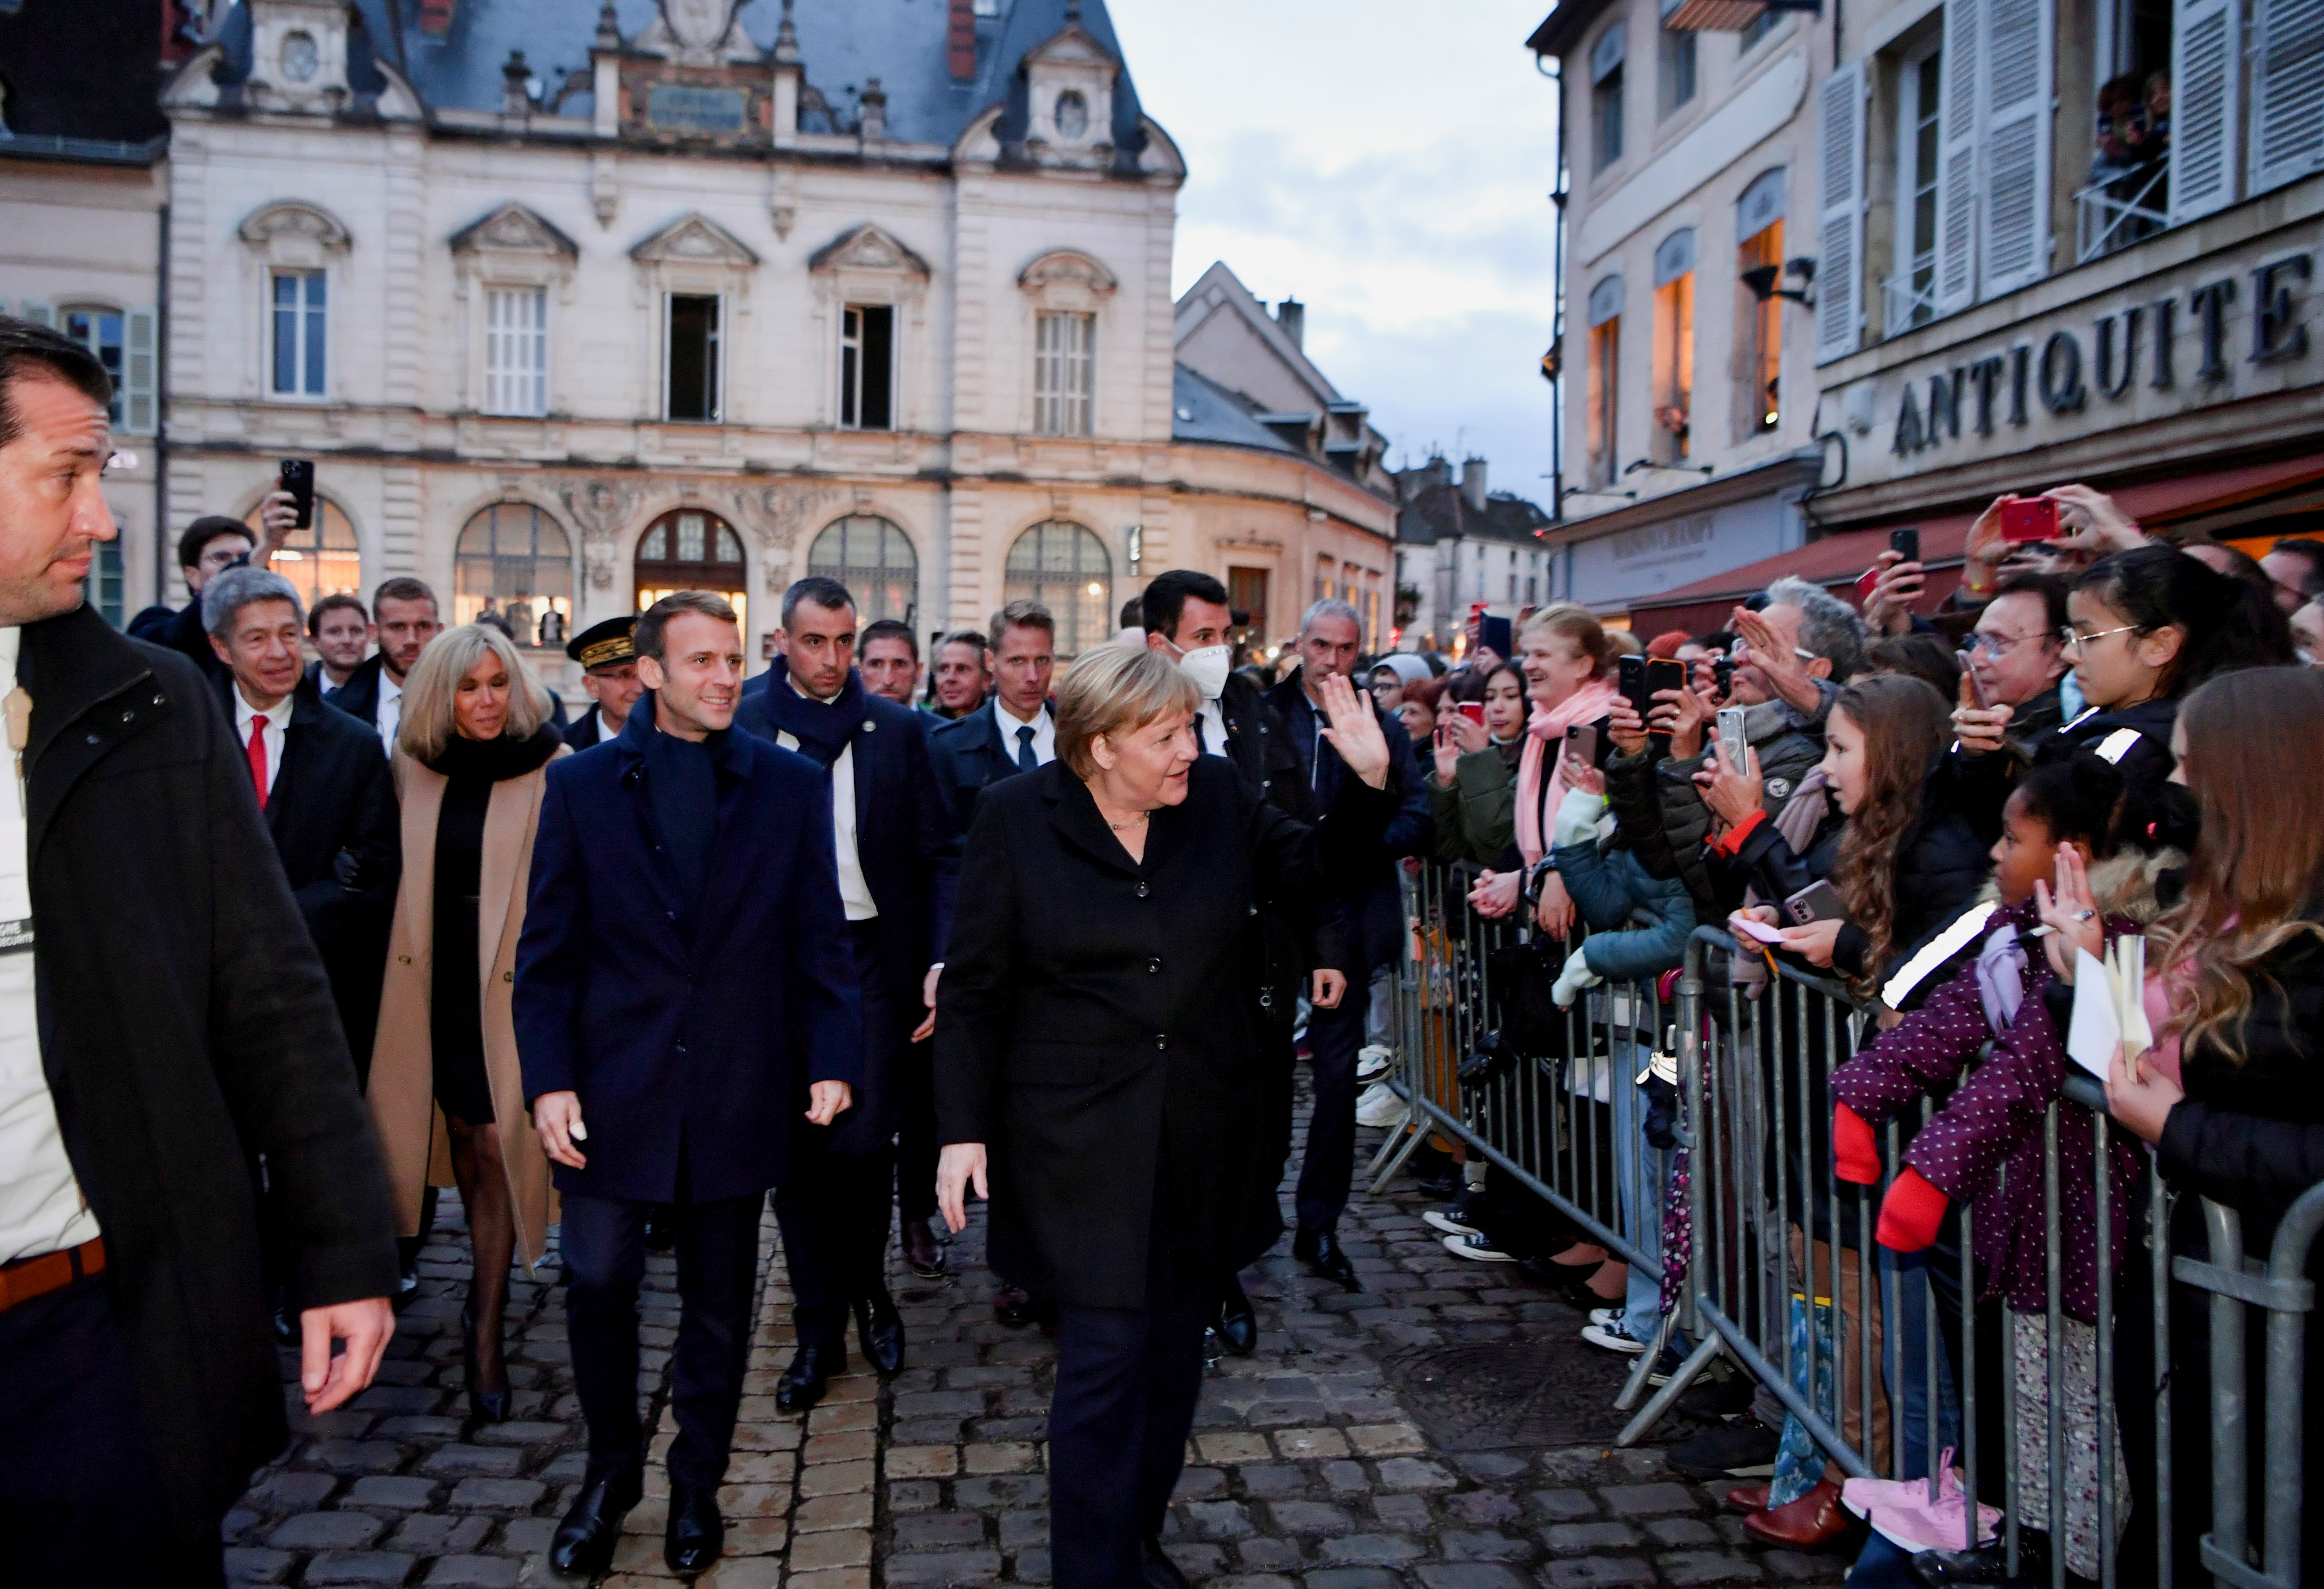 France's President Emmanuel Macron, flanked by his wife Brigitt Macron, is greeted by members of the public with outgoing German Chancellor Angela Merkel upon their arrival prior to talks, in Beaune, France, November 3, 2021. Philippe Desmazes/Pool via REUTERS